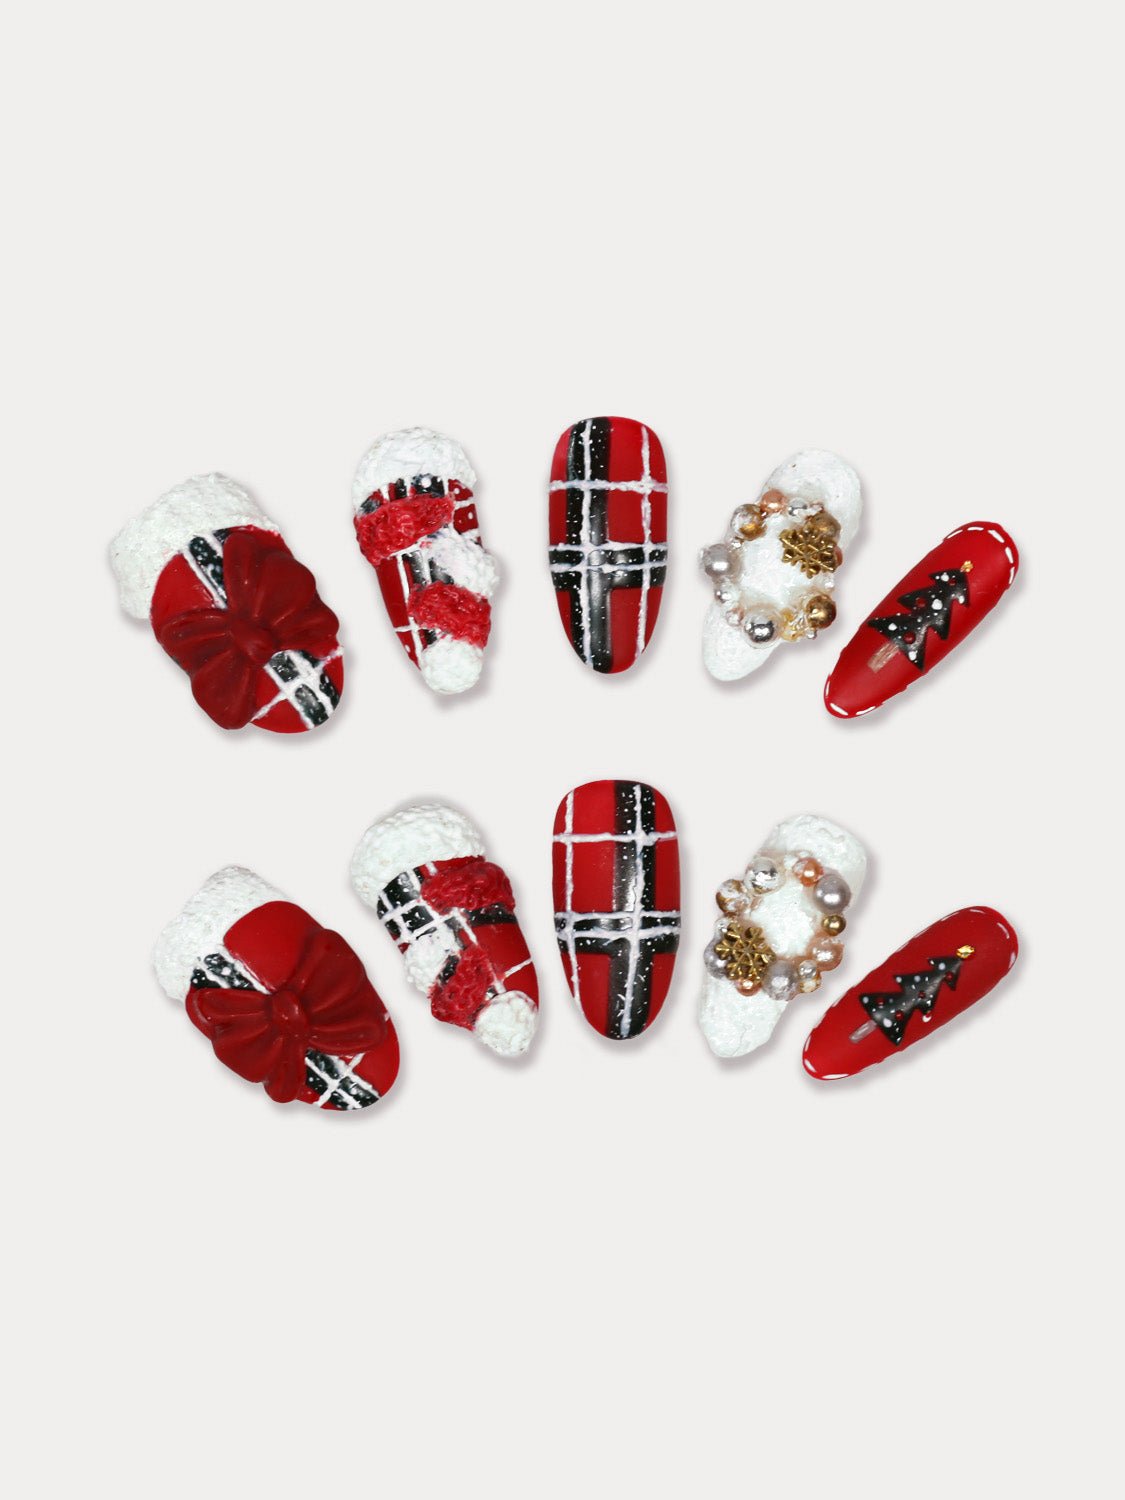 MIEAP Christmas Gift press on nail set is a festive holiday-themed design, features the classic Christmas colors of red and green, and showcases snow-covered rooftops, Christmas trees adorned with gifts and colorful lights, Christmas wreaths with a delicate layer of snow on top. #MIEAP #MIEAPnails #pressonnail #falsenail #acrylicnail #nails #nailart #naildesign #nailinspo #handmadenail #nail2023 #shortnail #rednail #christmasnail